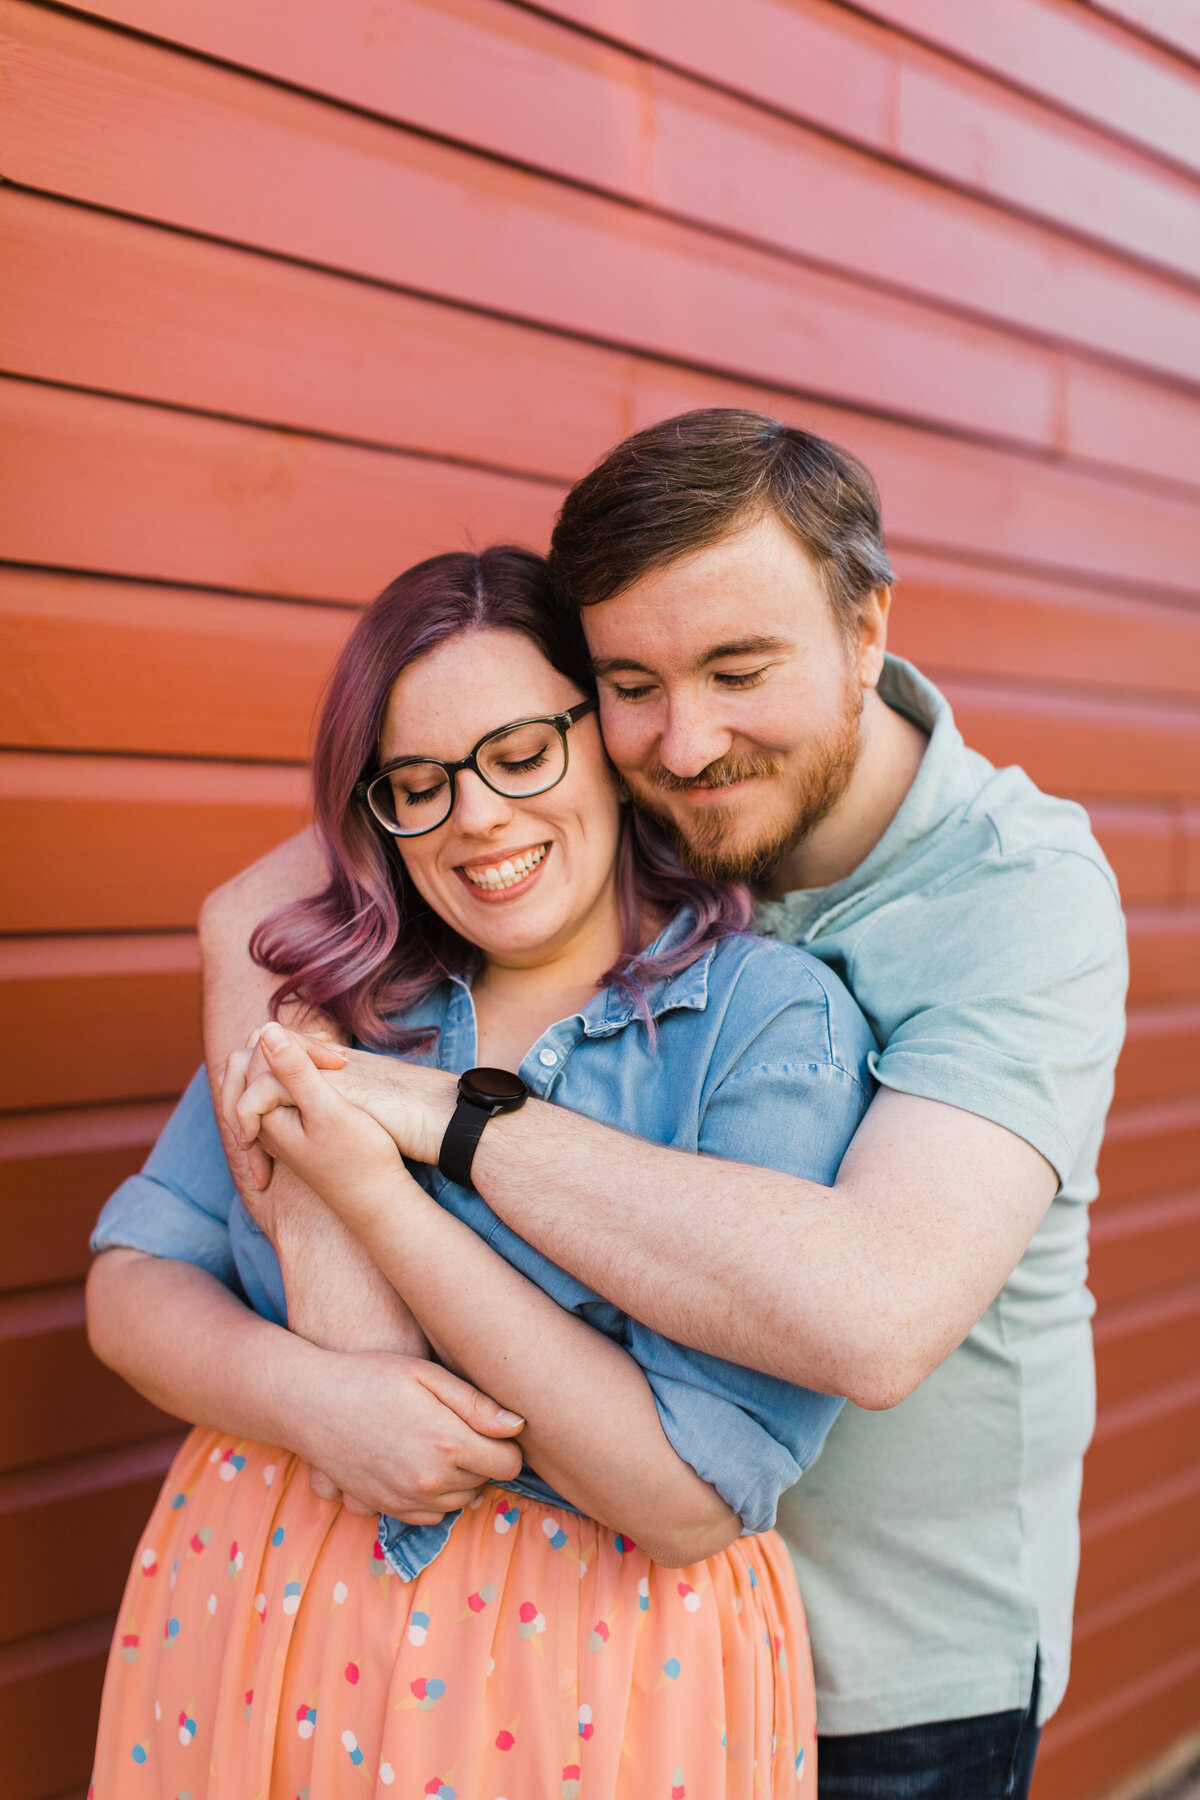 A couple acting as the big spoon and little spoon in front of a red wall during their engagement session in Fort Worth, Texas. The woman on the left is the little spoon and is wearing a jean jacket and a salmon skirt with colorful polka dots and glasses. The man on the right is the big spoon and is wearing a short sleeve collared shirt and jeans.